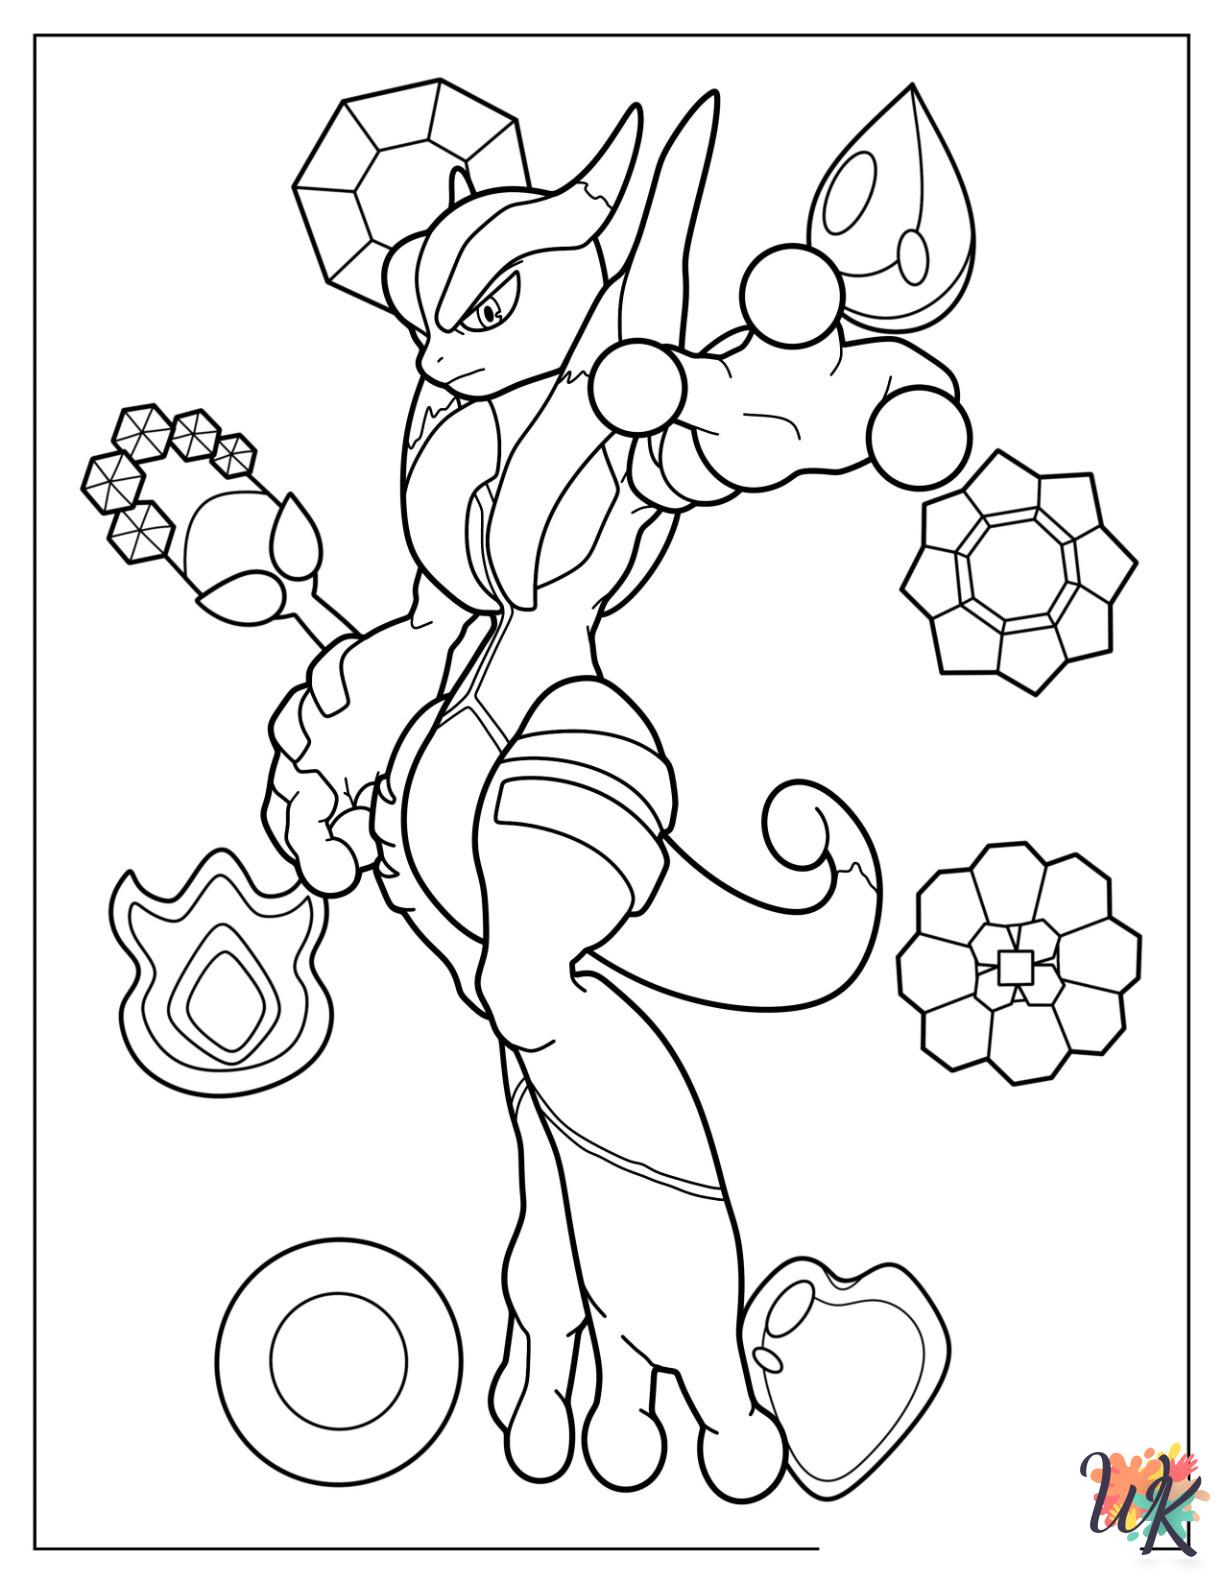 Mewtwo coloring pages for preschoolers